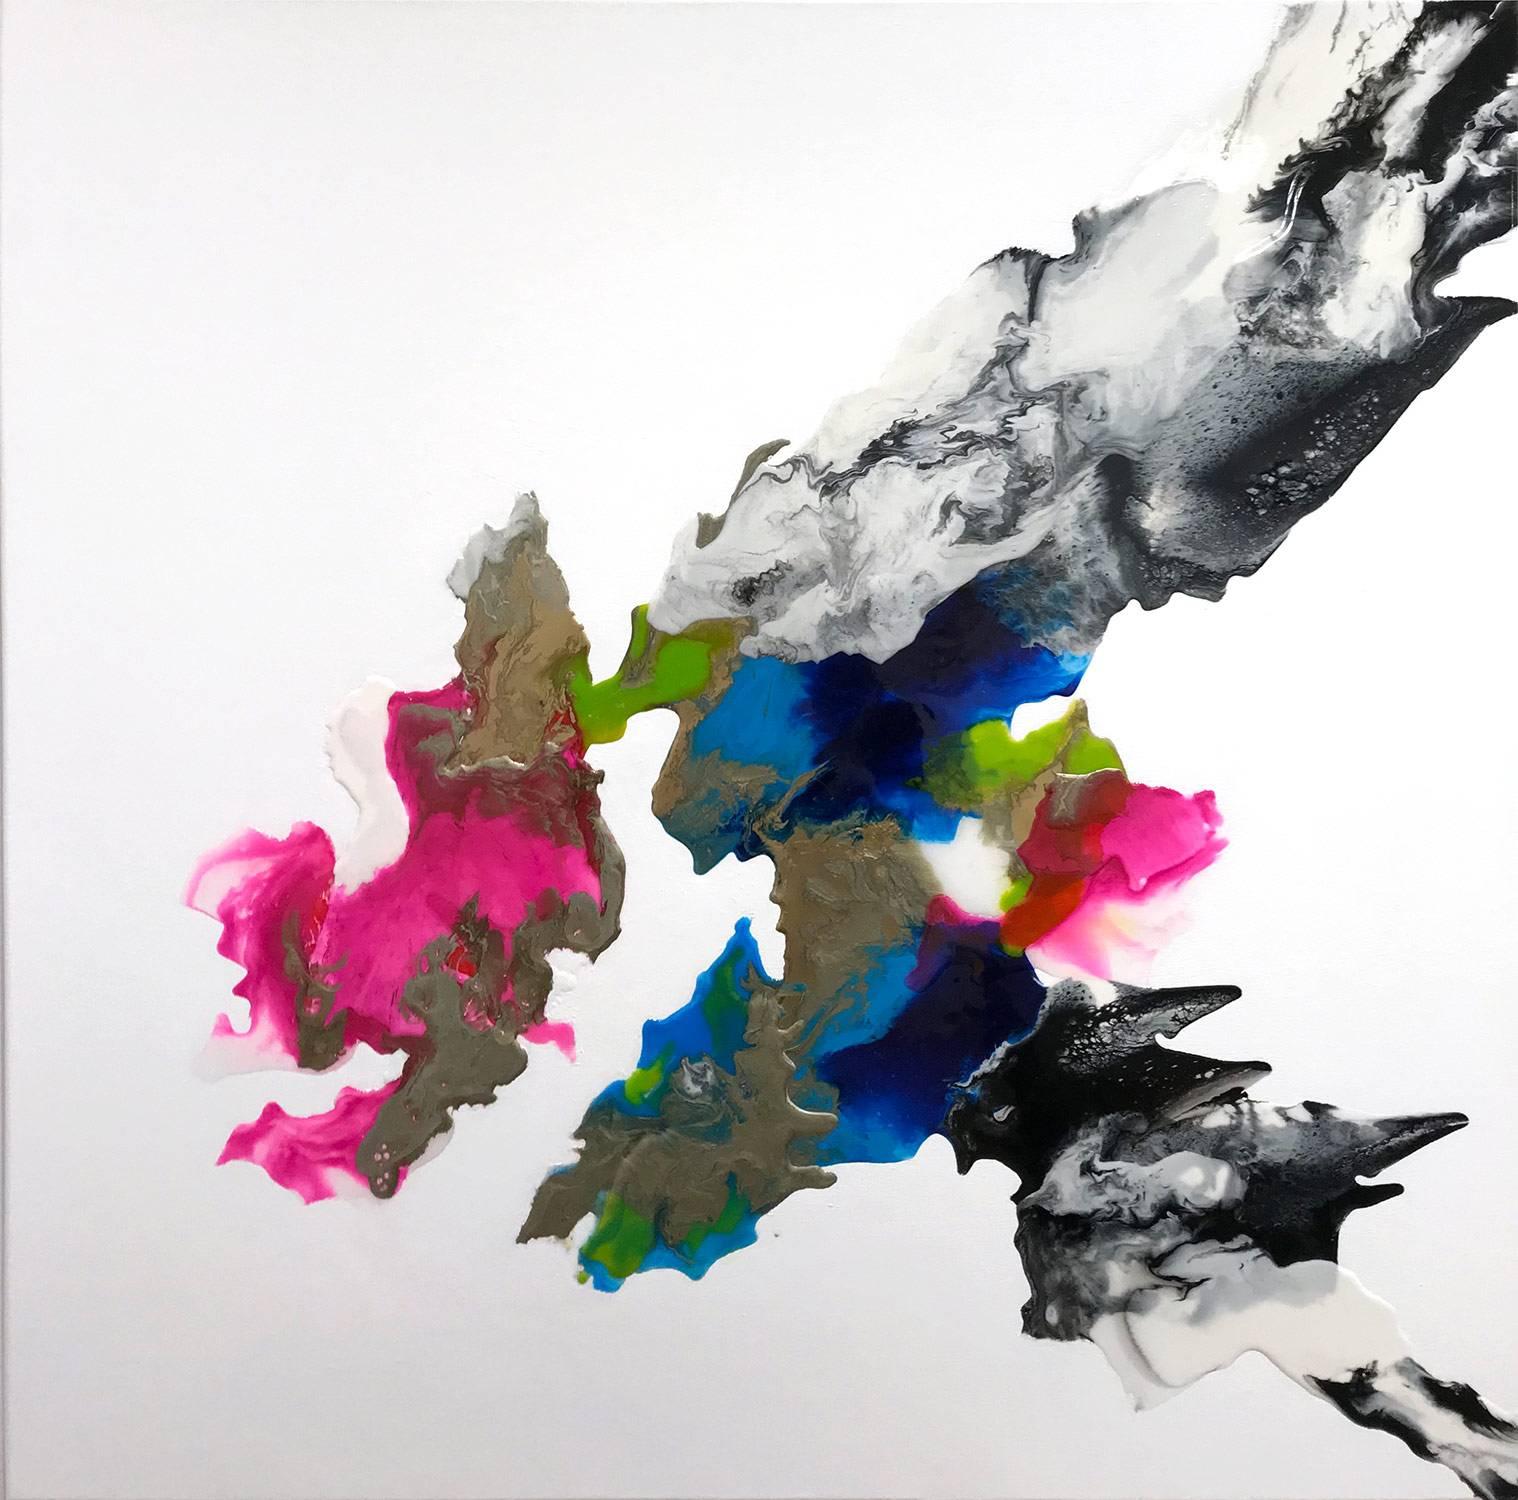 Corinne Natel Abstract Painting - "Rokuro" Contemporary Colorful Fluid Mixed Media Painting on Gallery Canvas